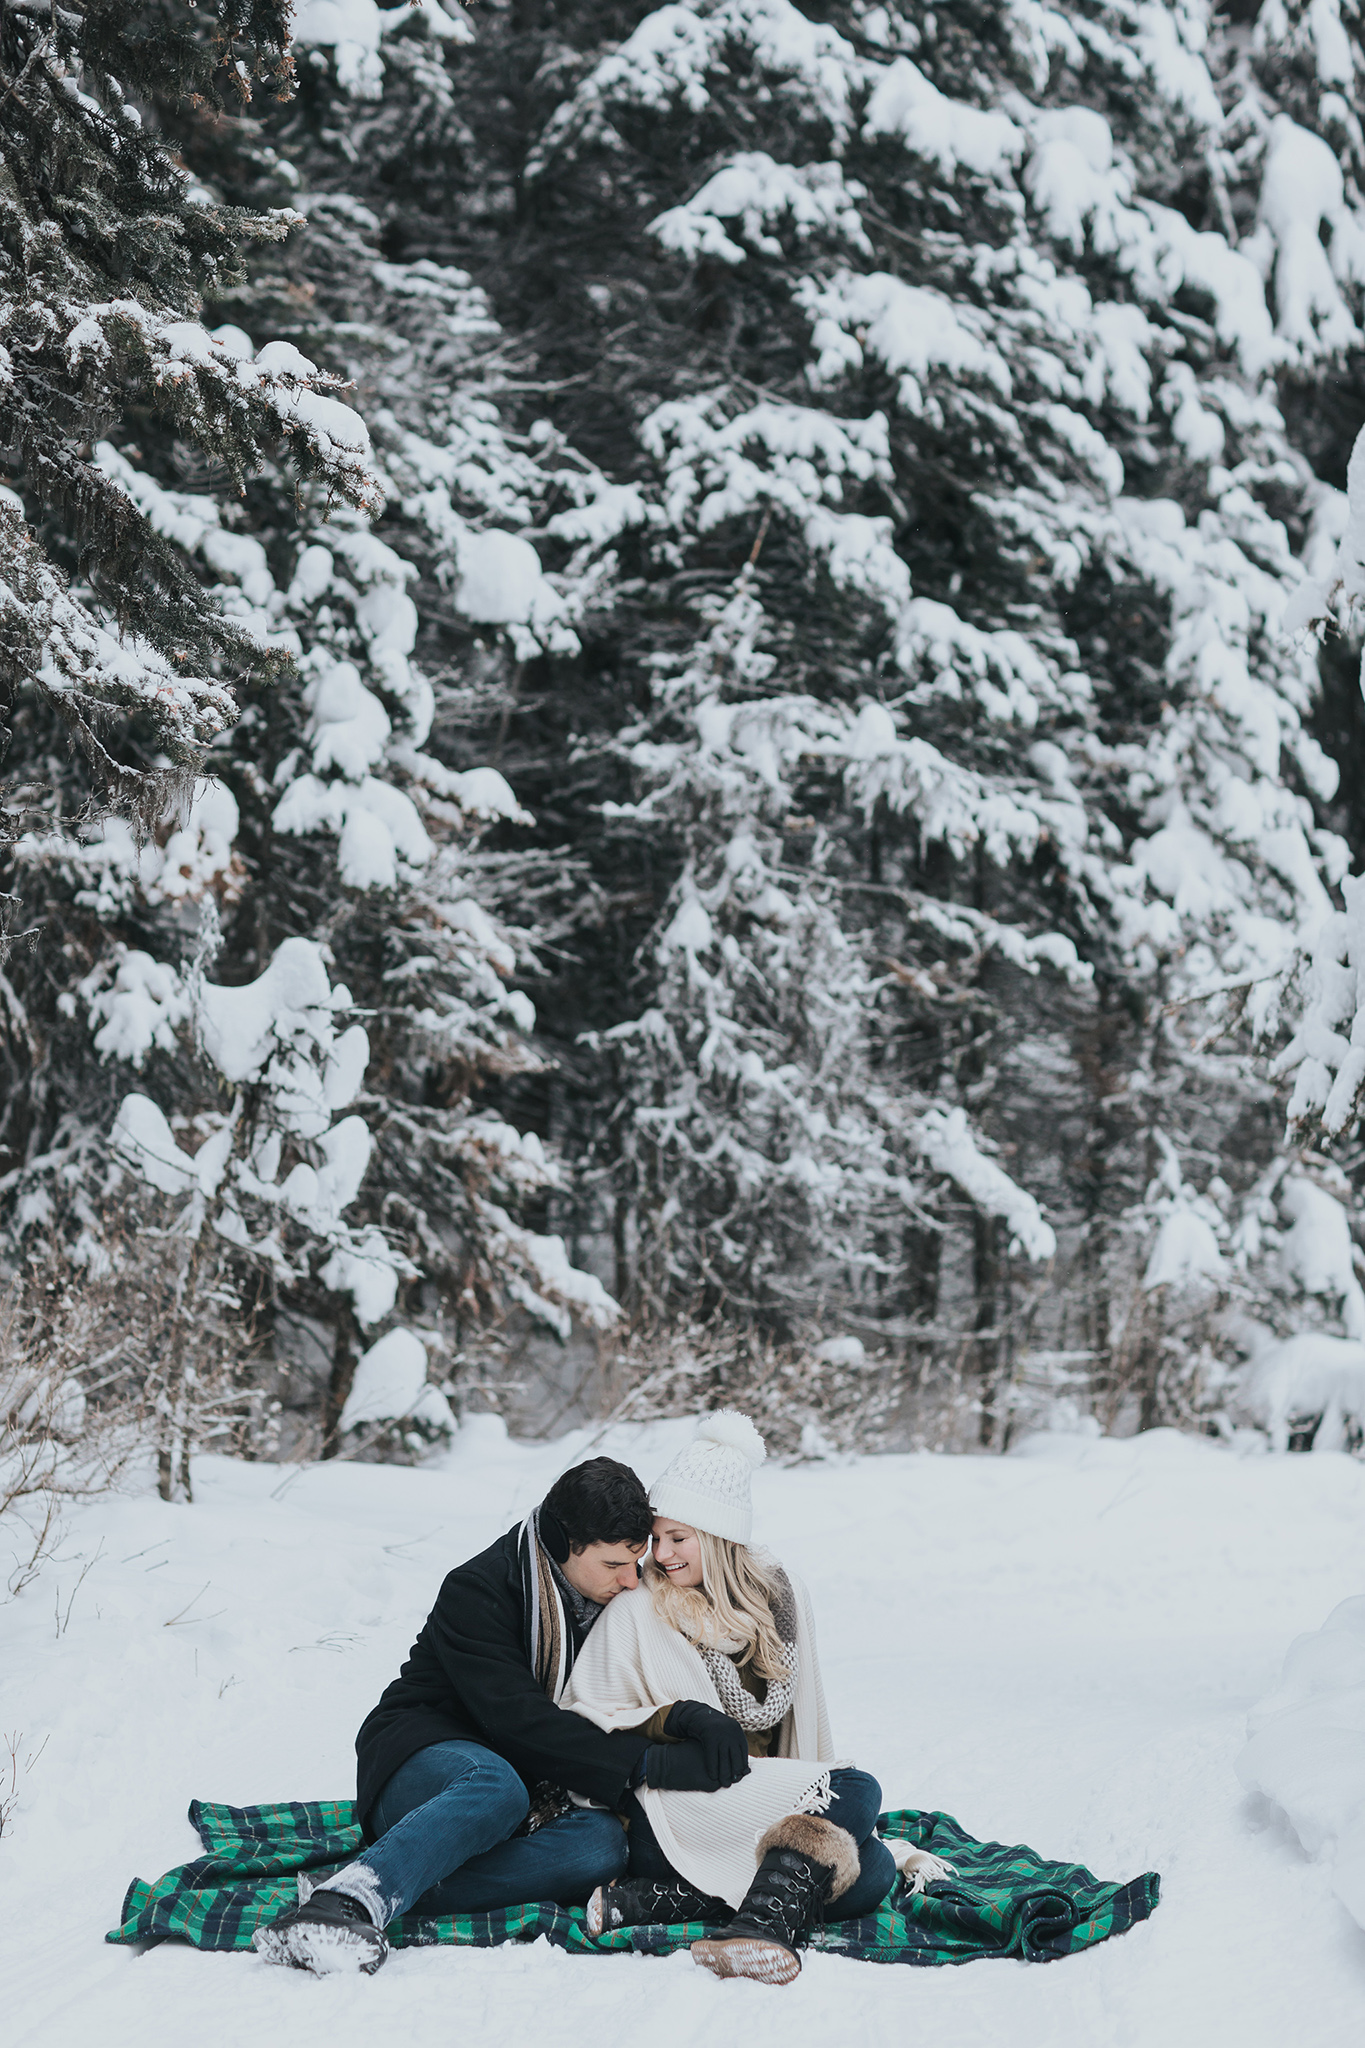 cuddly couples session in the snow during winter. Woodland forest couples pictures